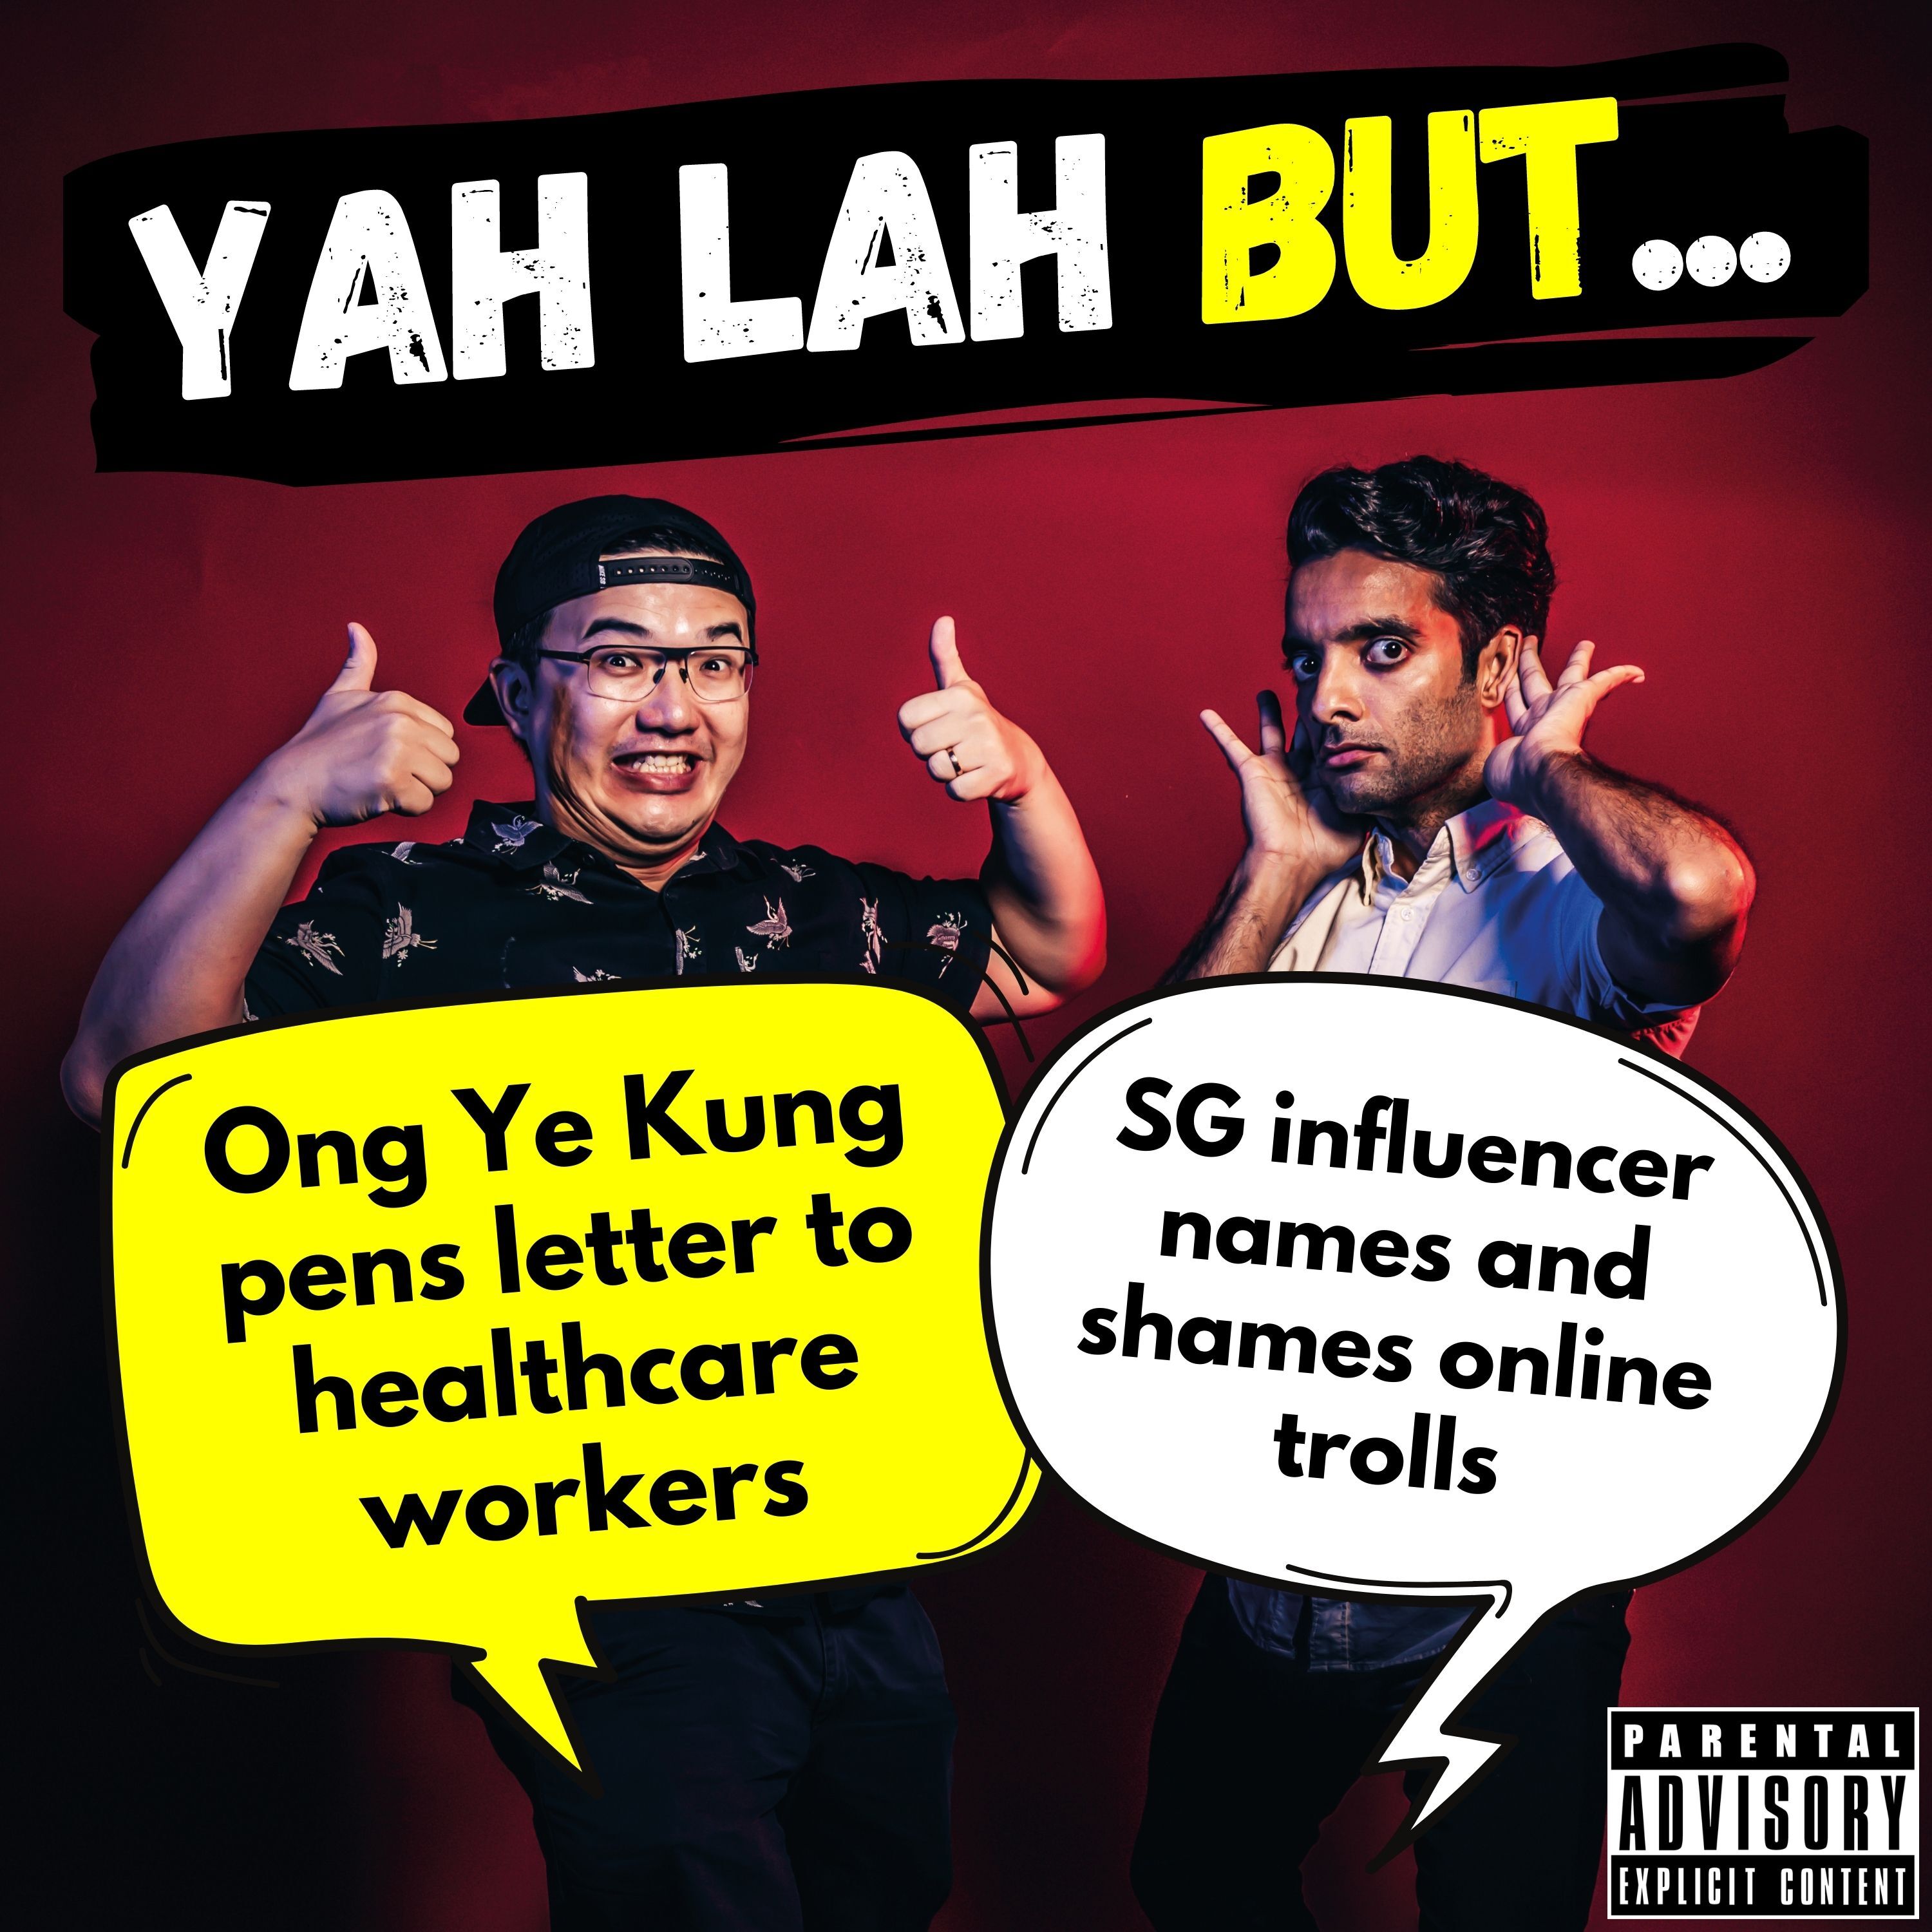 #266 - Ong Ye Kung pens letter to healthcare workers & SG influencer names and shames online trolls